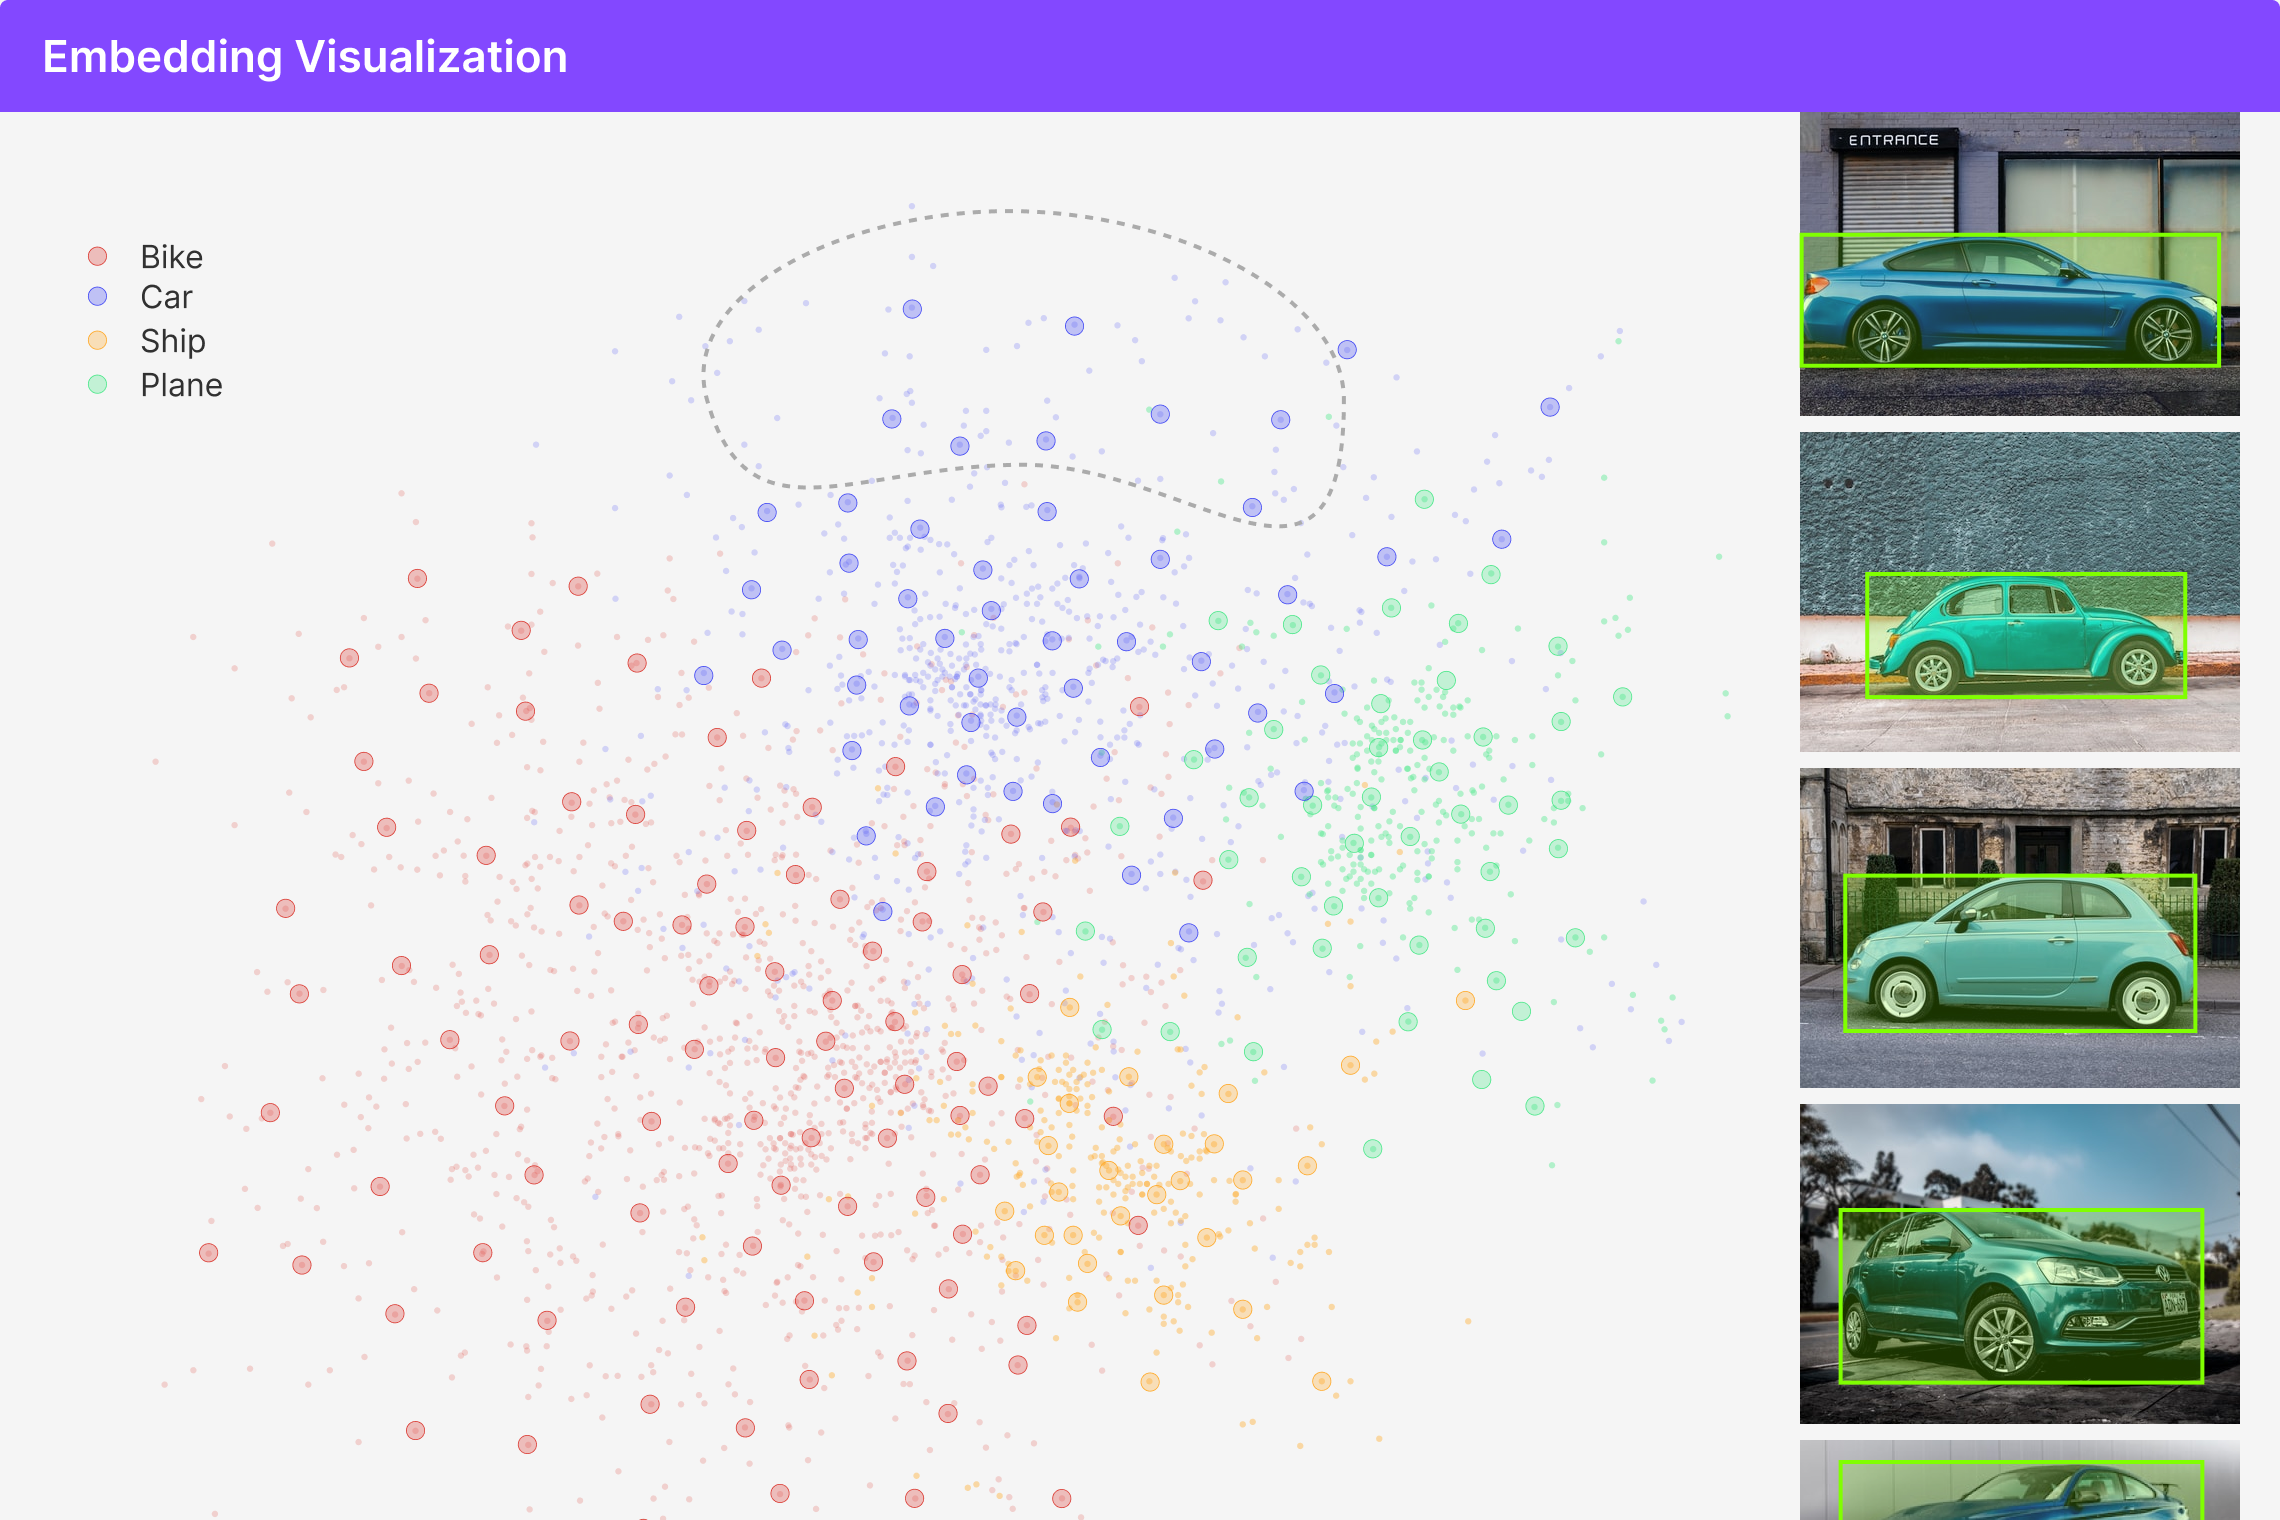 View of DataOps embedding visualization tool to create embeddings for datasets